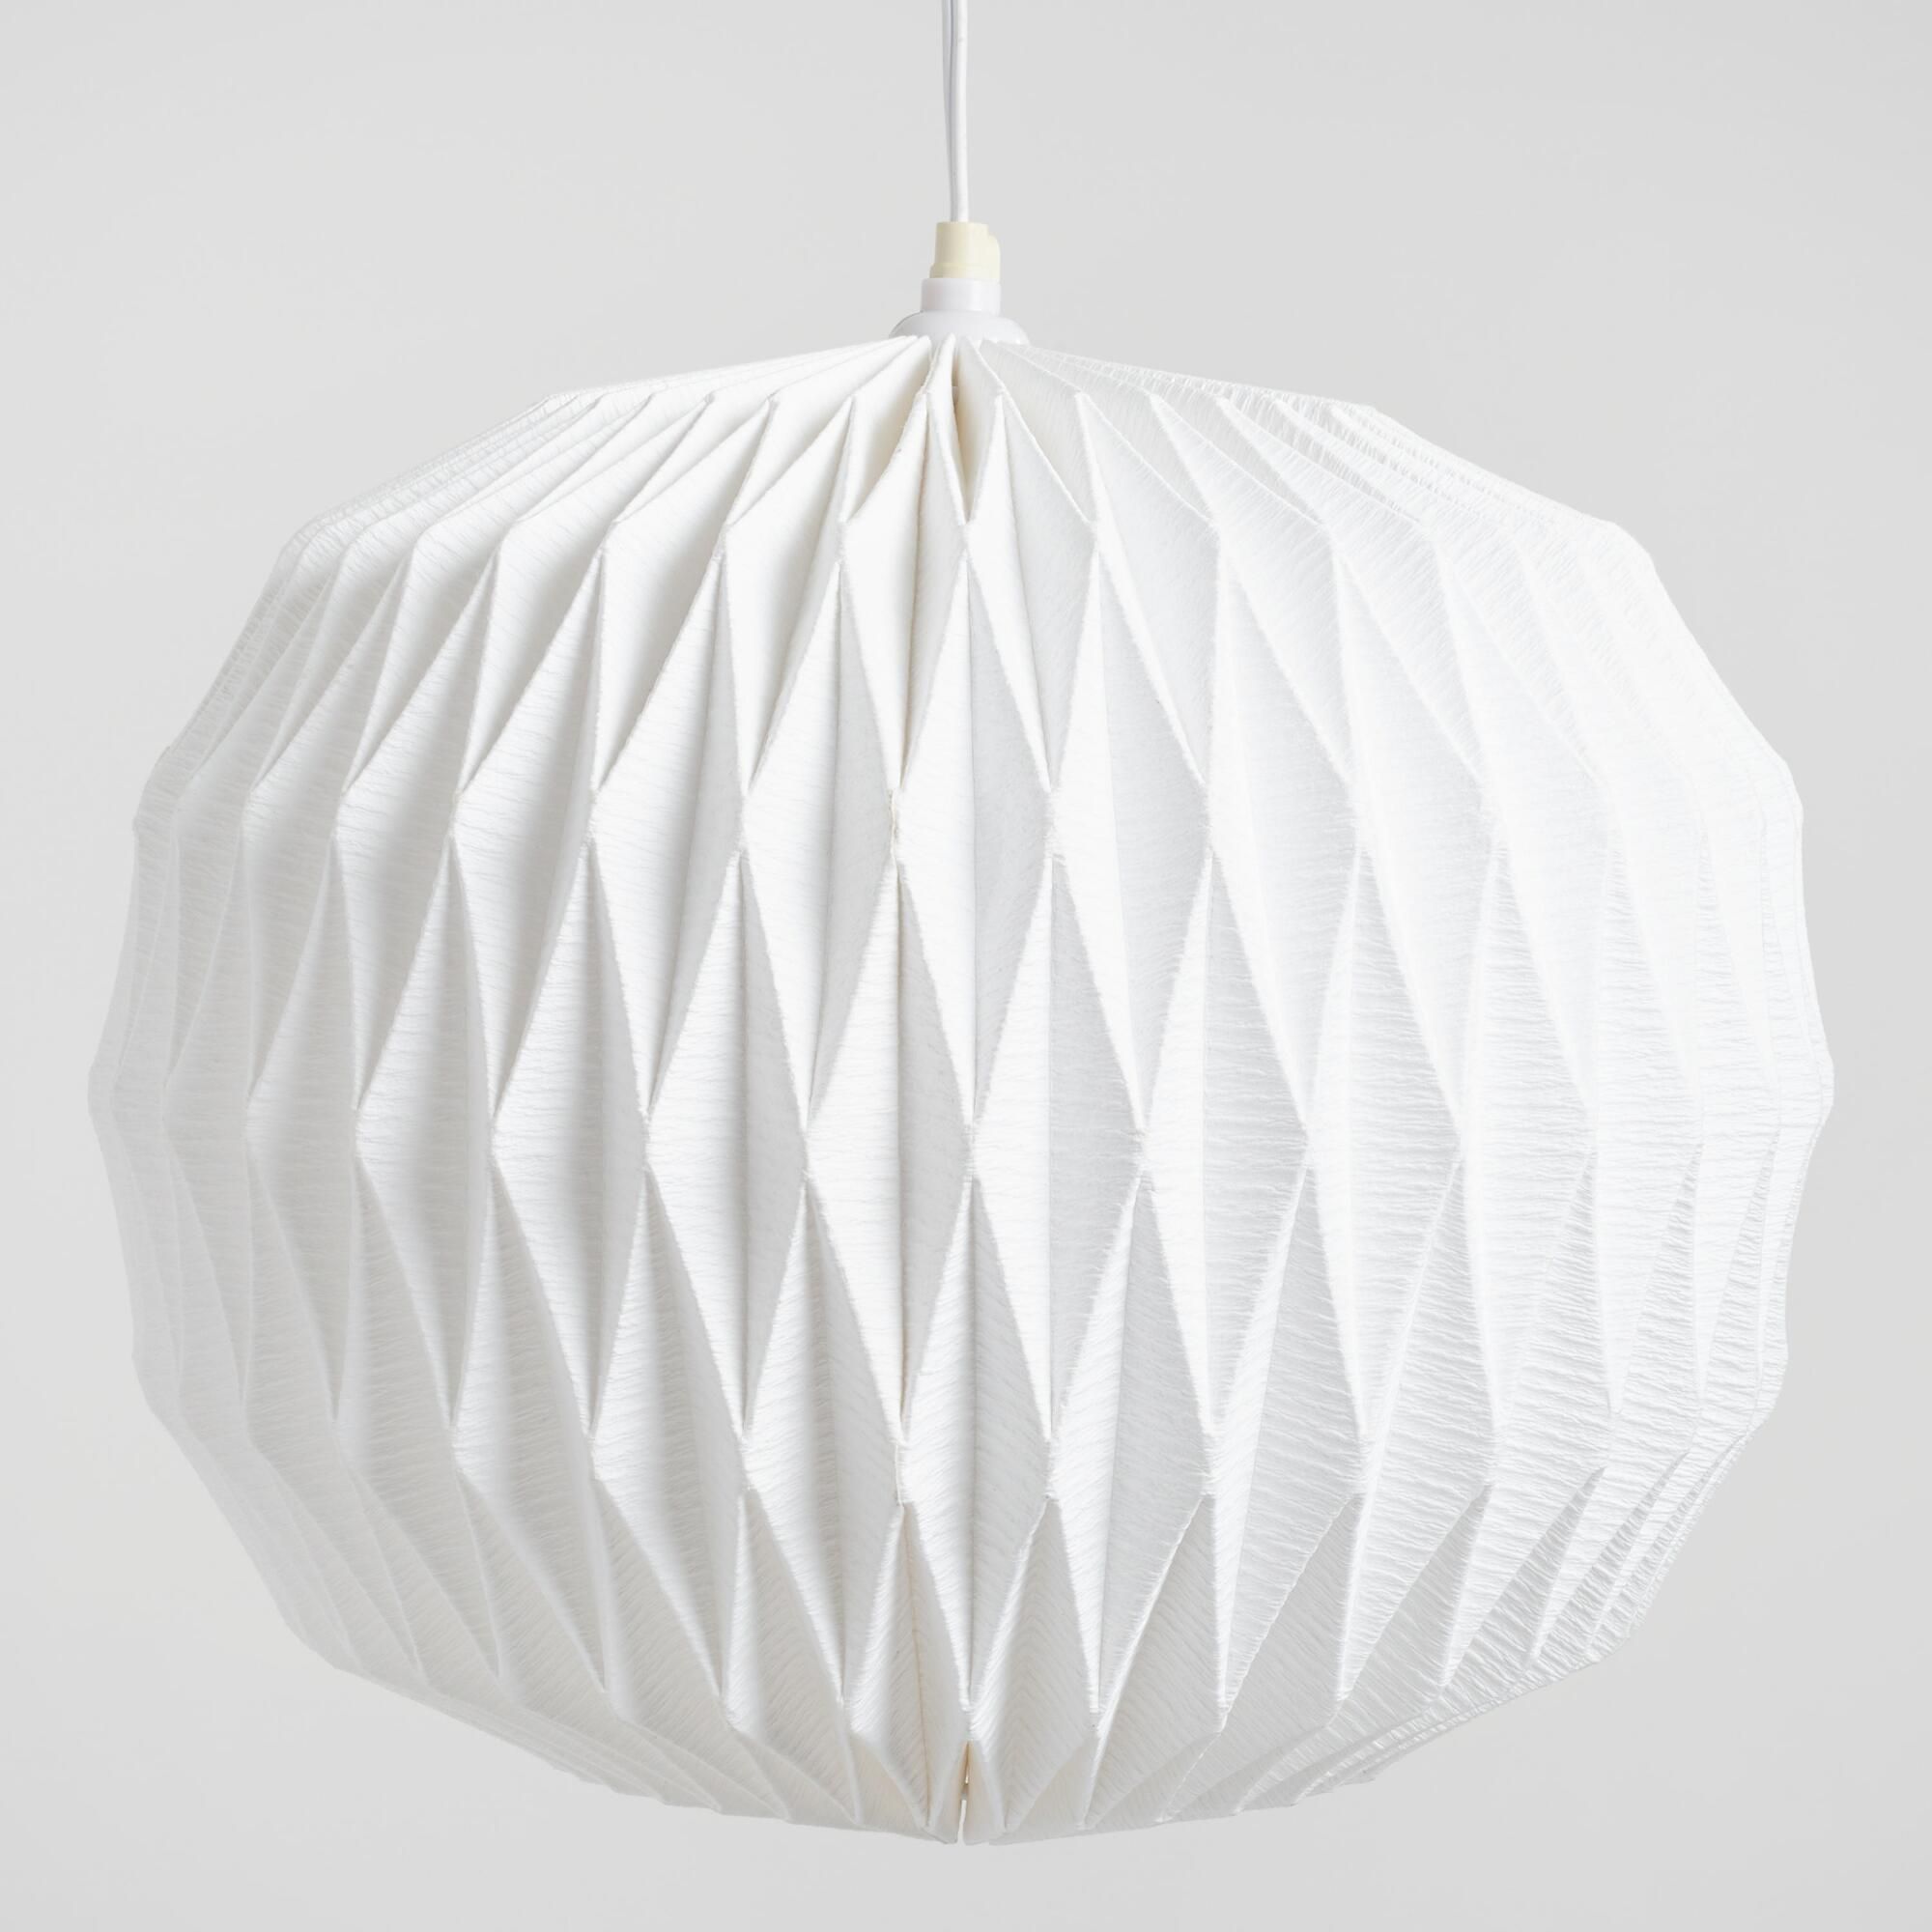 large white paper light shades